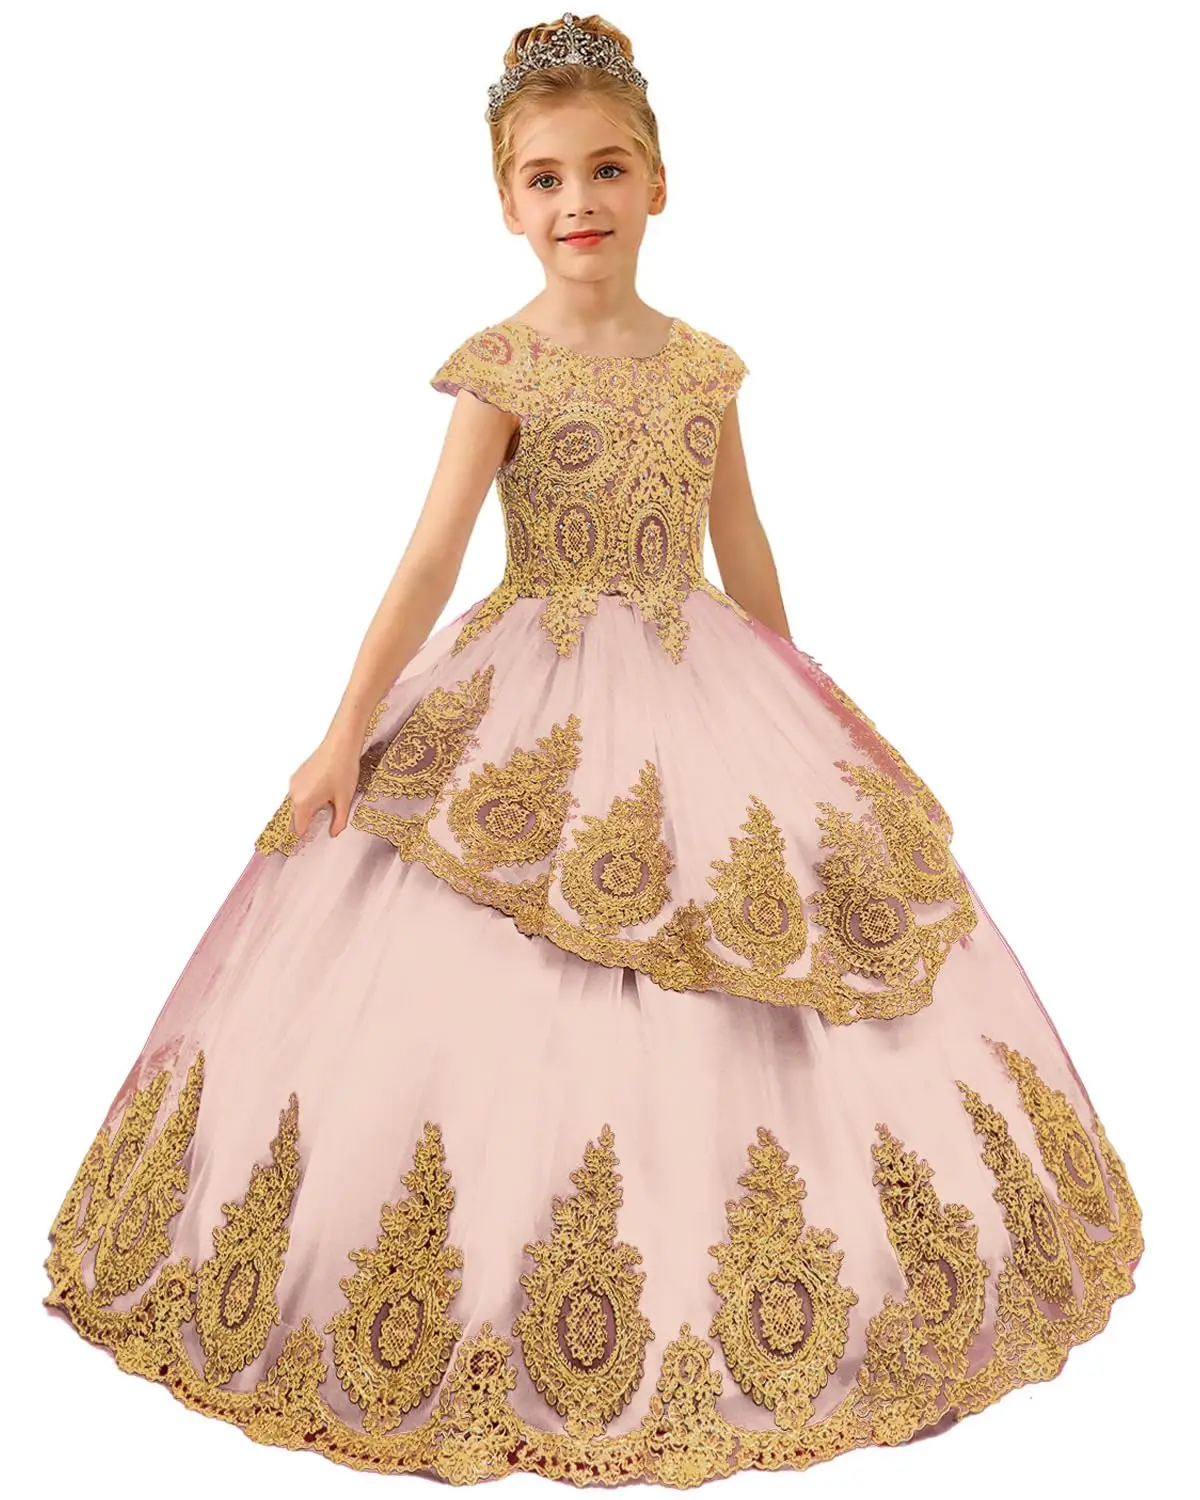 

Gold Beaded Appliques Flower Girl Dress For Wedding Lace Tiered Tulle Pageant First Communion Dress Toddler Kids Party Gown